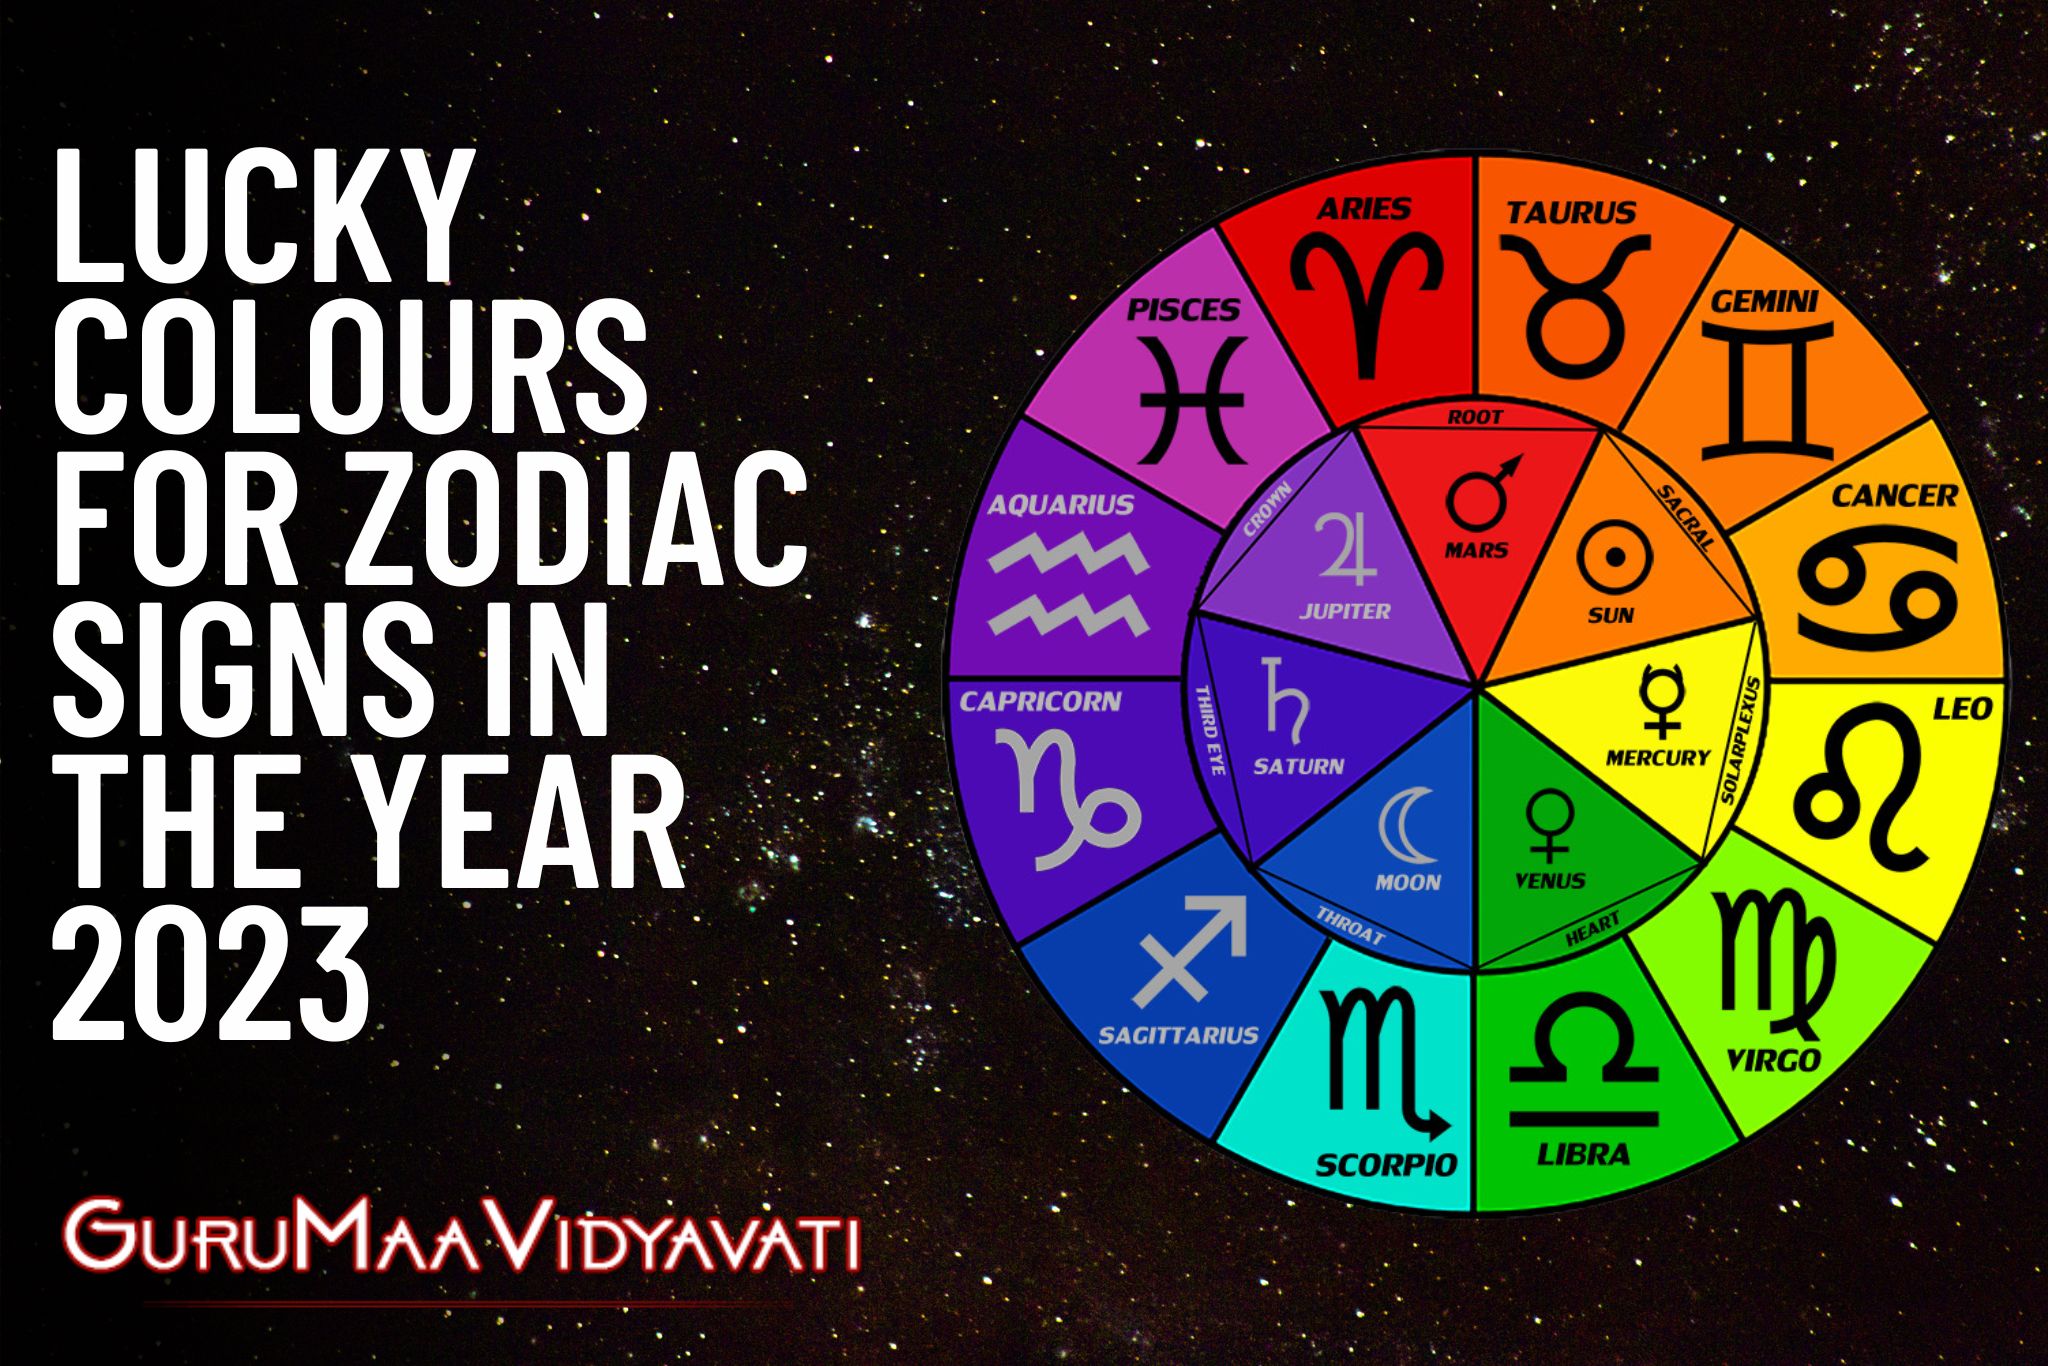 Lucky Colours for Zodiac Signs in the Year 2023